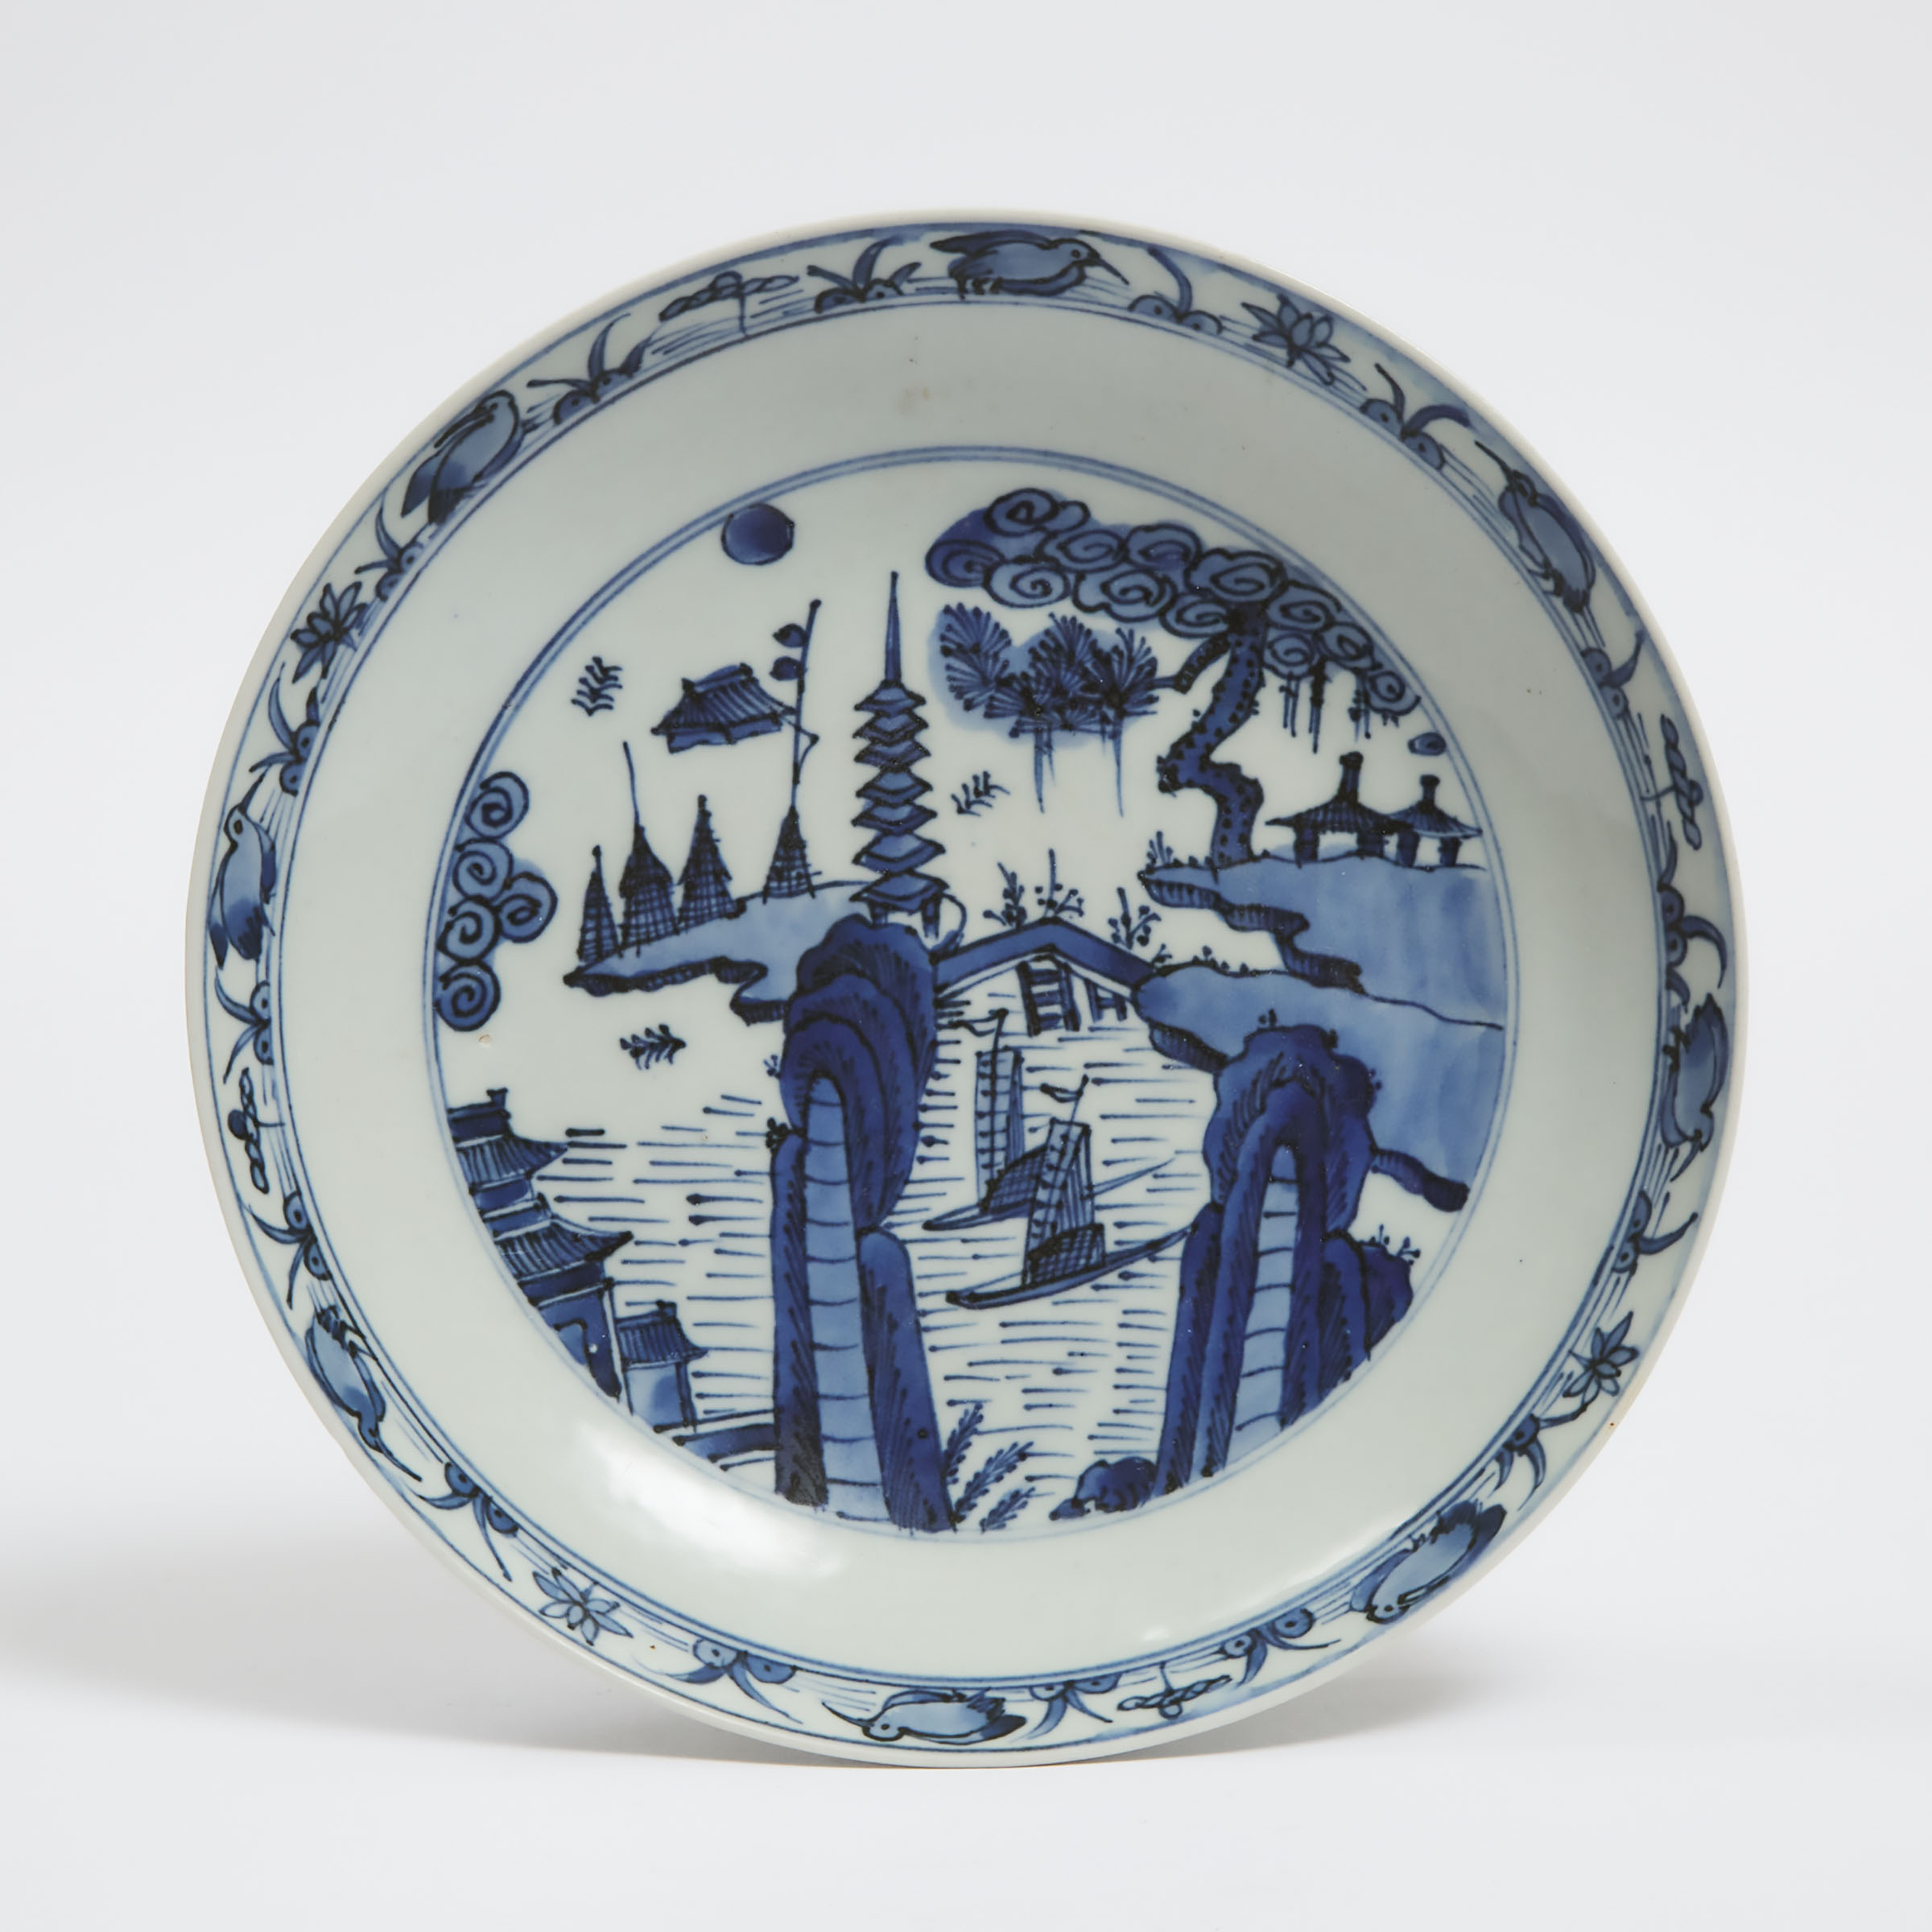 A Blue and White Landscape Plate ??????